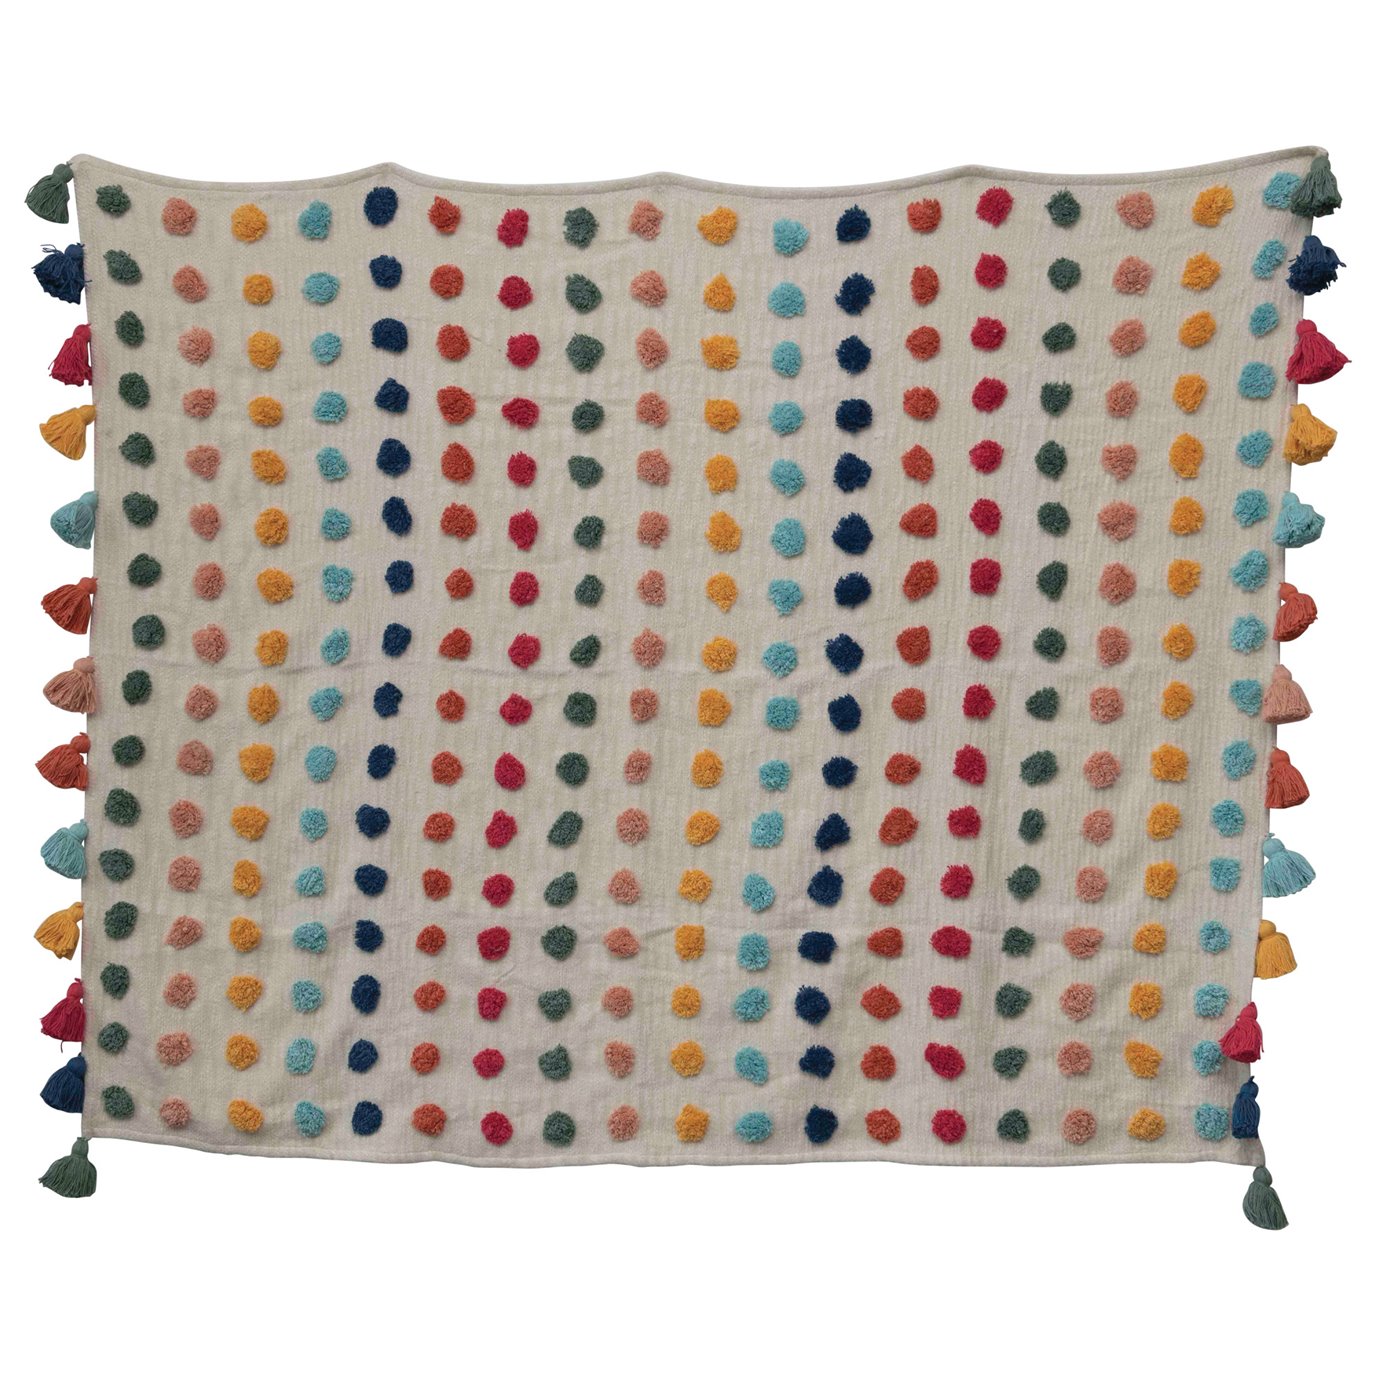 60"L x 50"W Woven Cotton Throw with Tufted Dots & Tassels